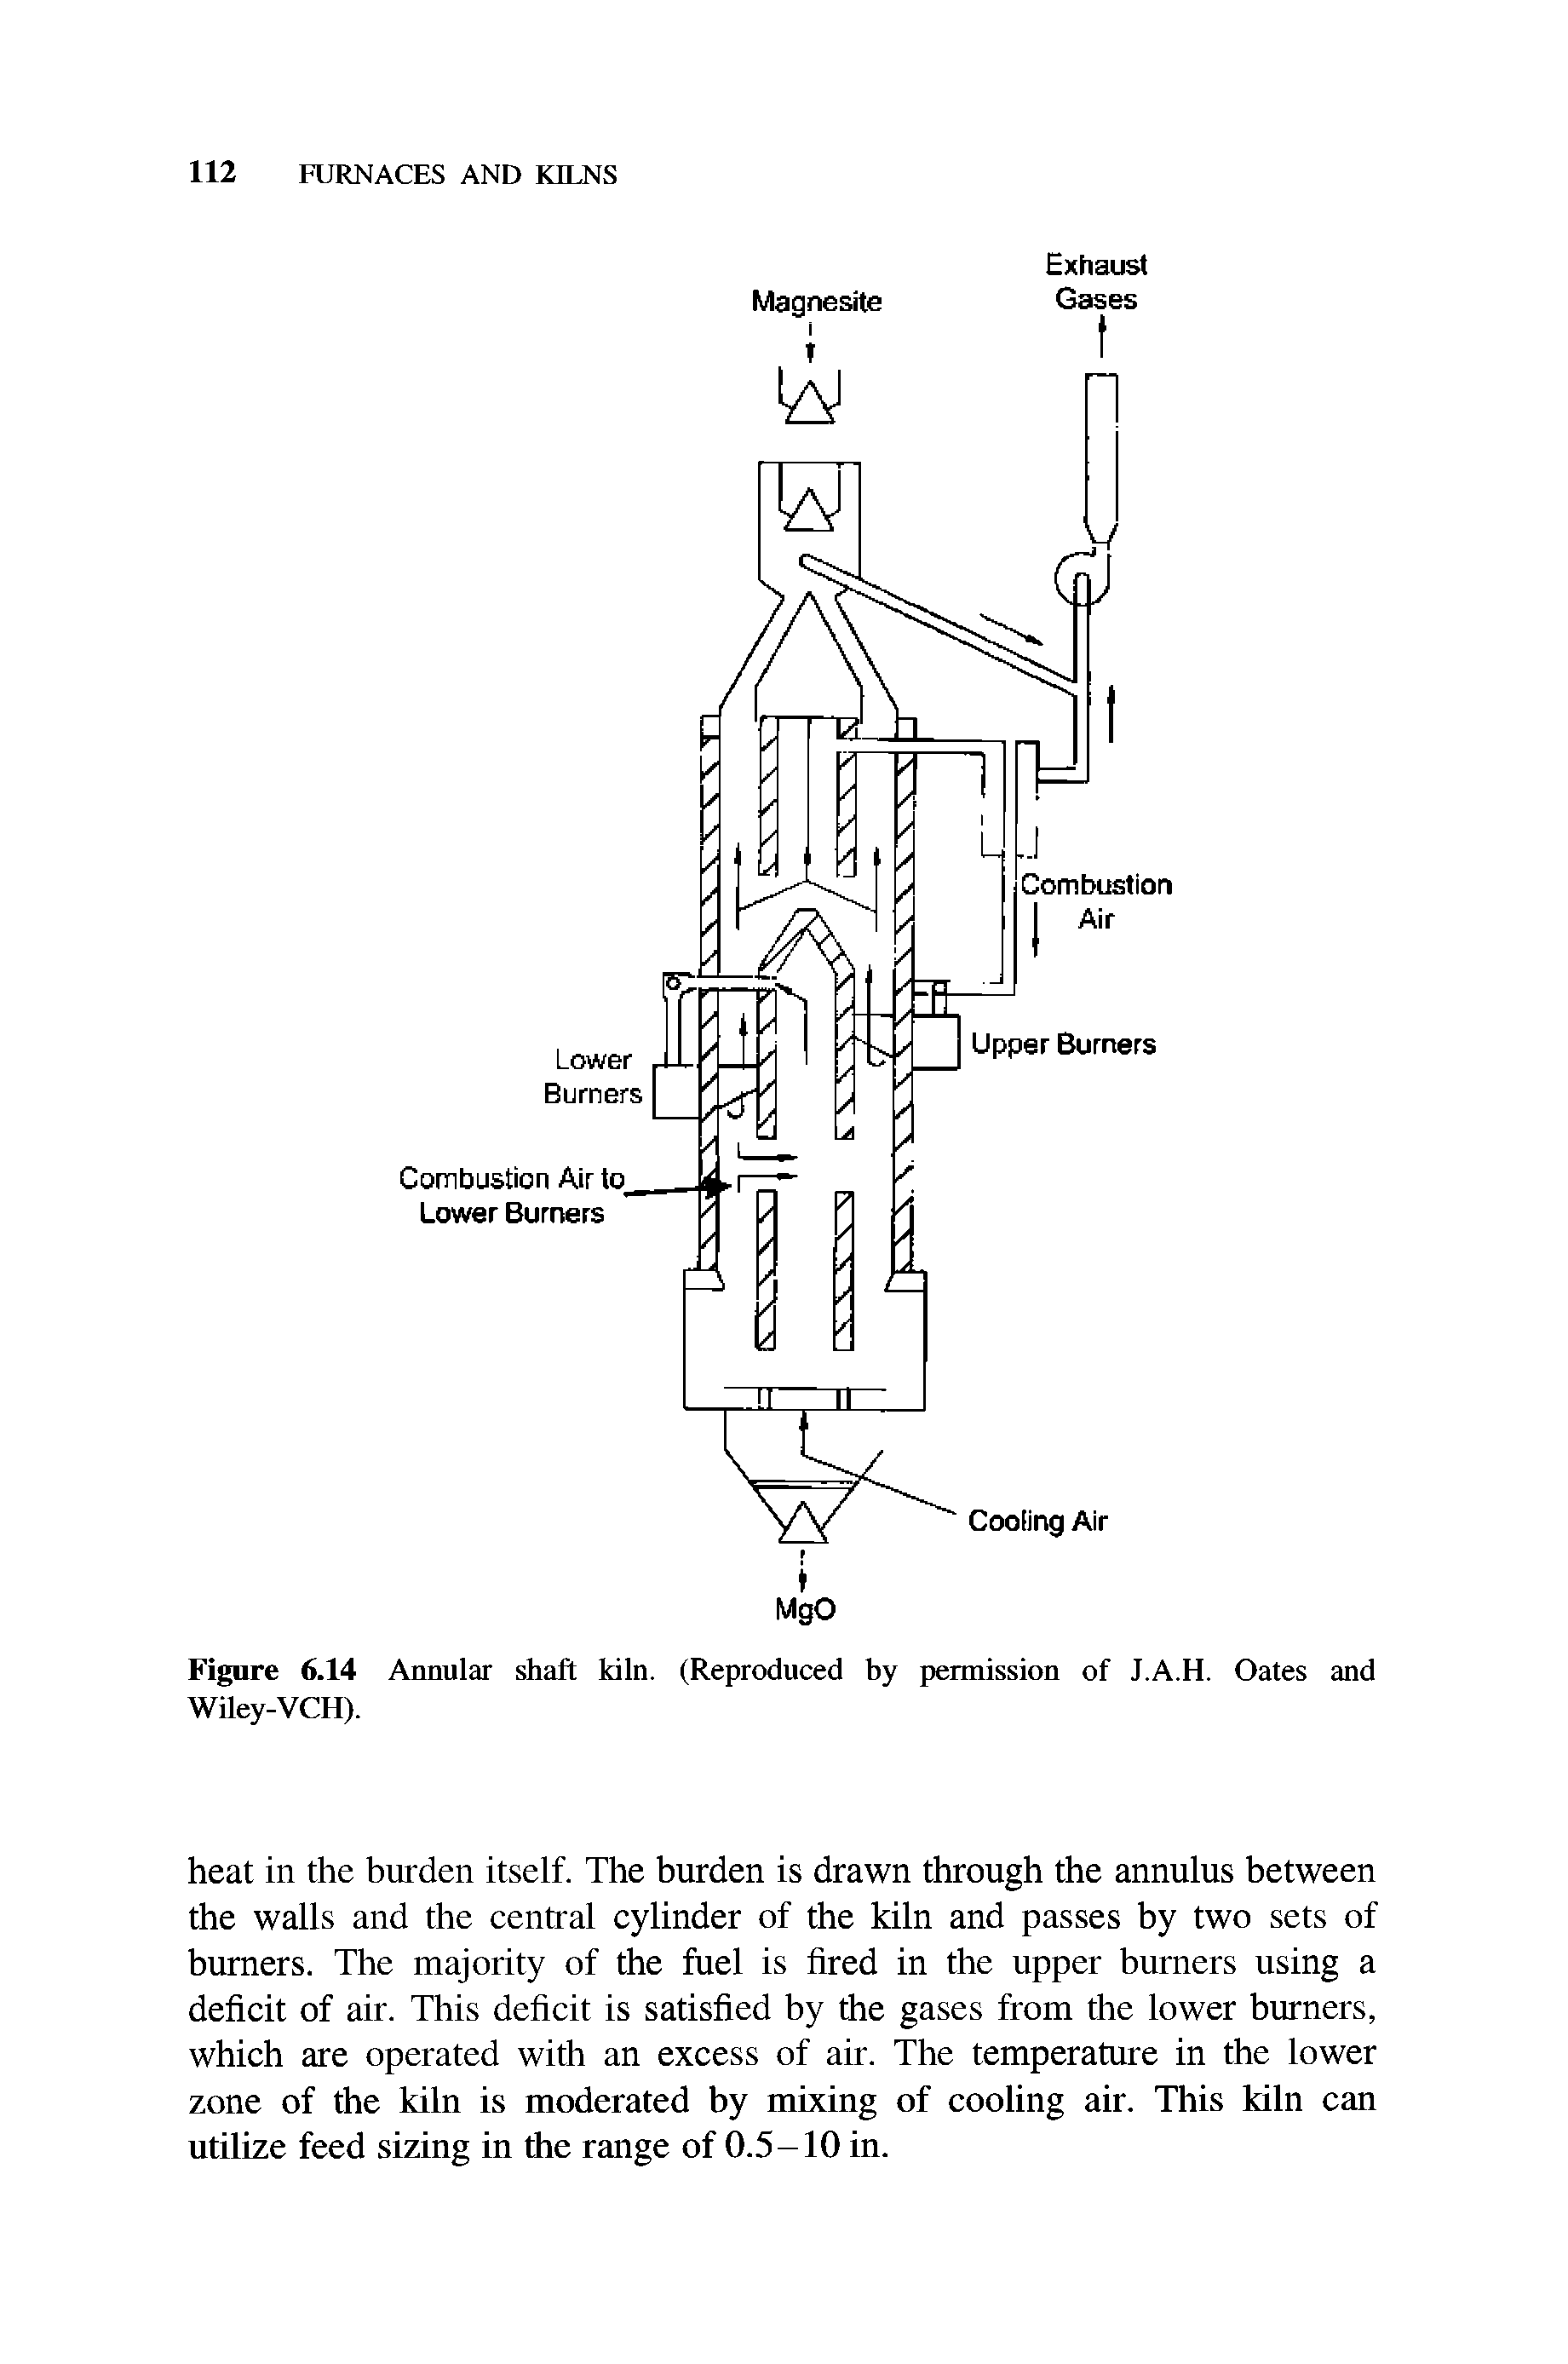 Figure 6.14 Annular shaft kiln. (Reproduced by permission of J.A.H. Oates and Wiley-VCH).